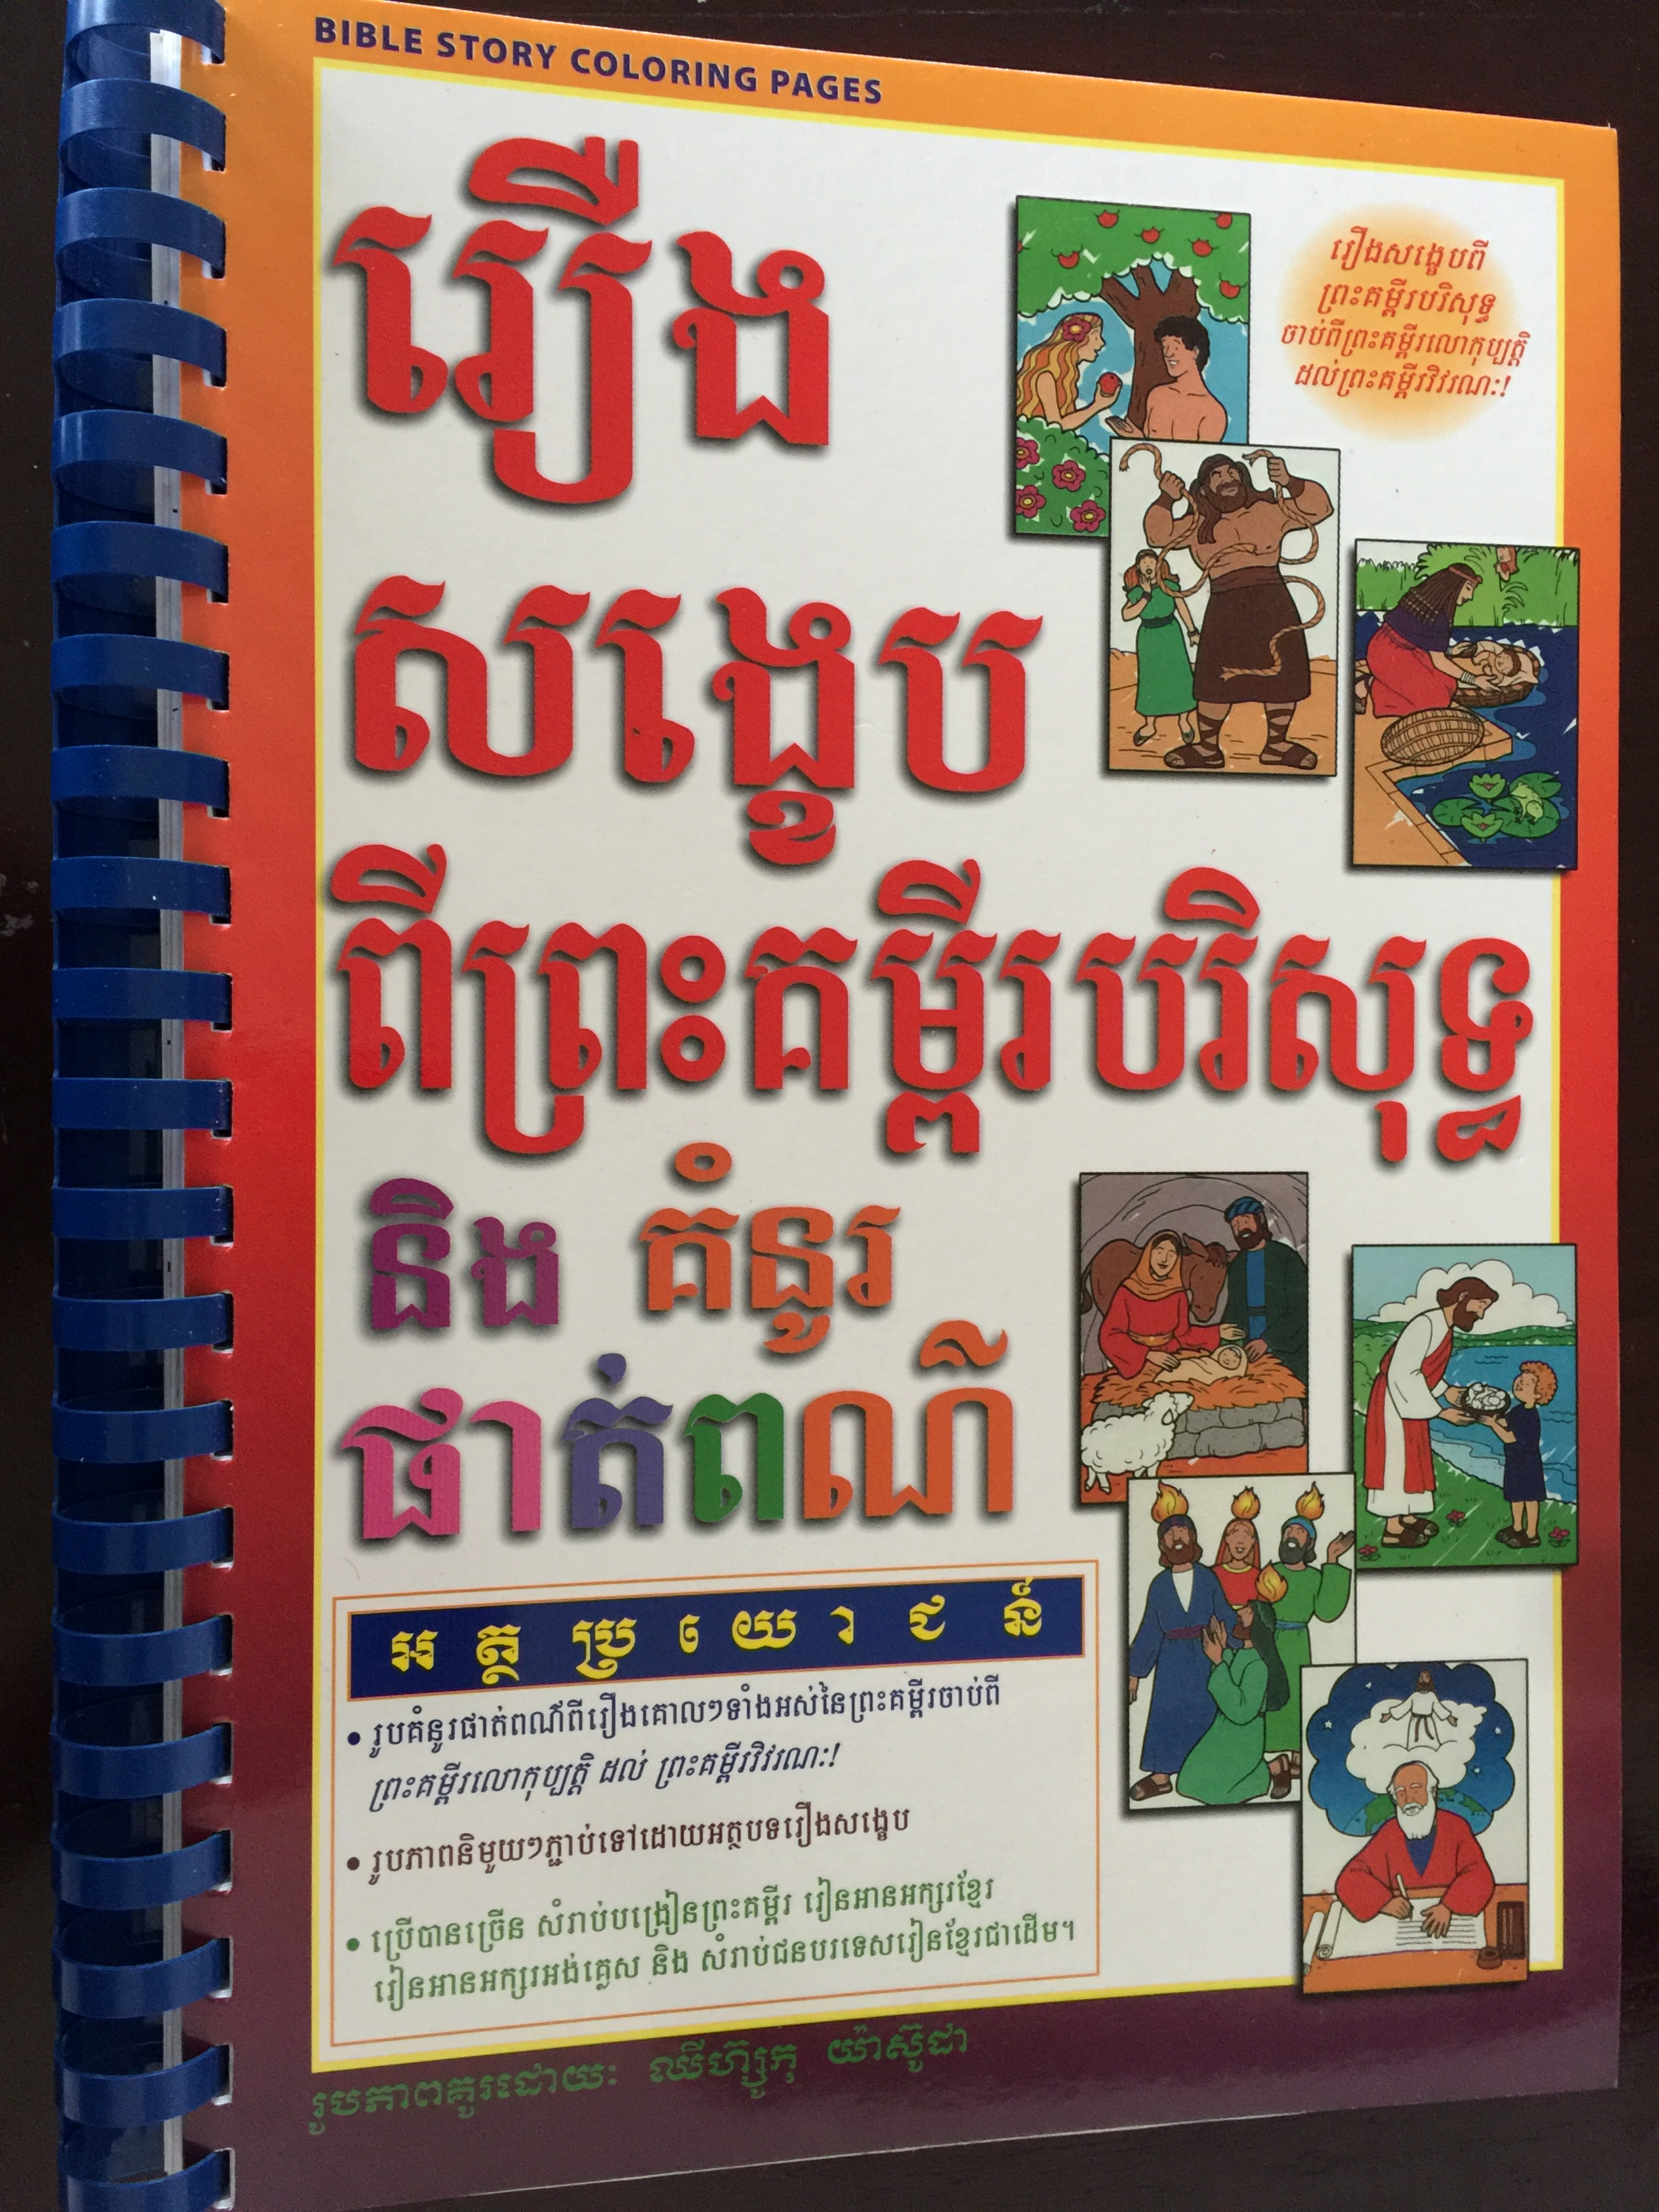 Bible Story Coloring Pages in Khmer language 1